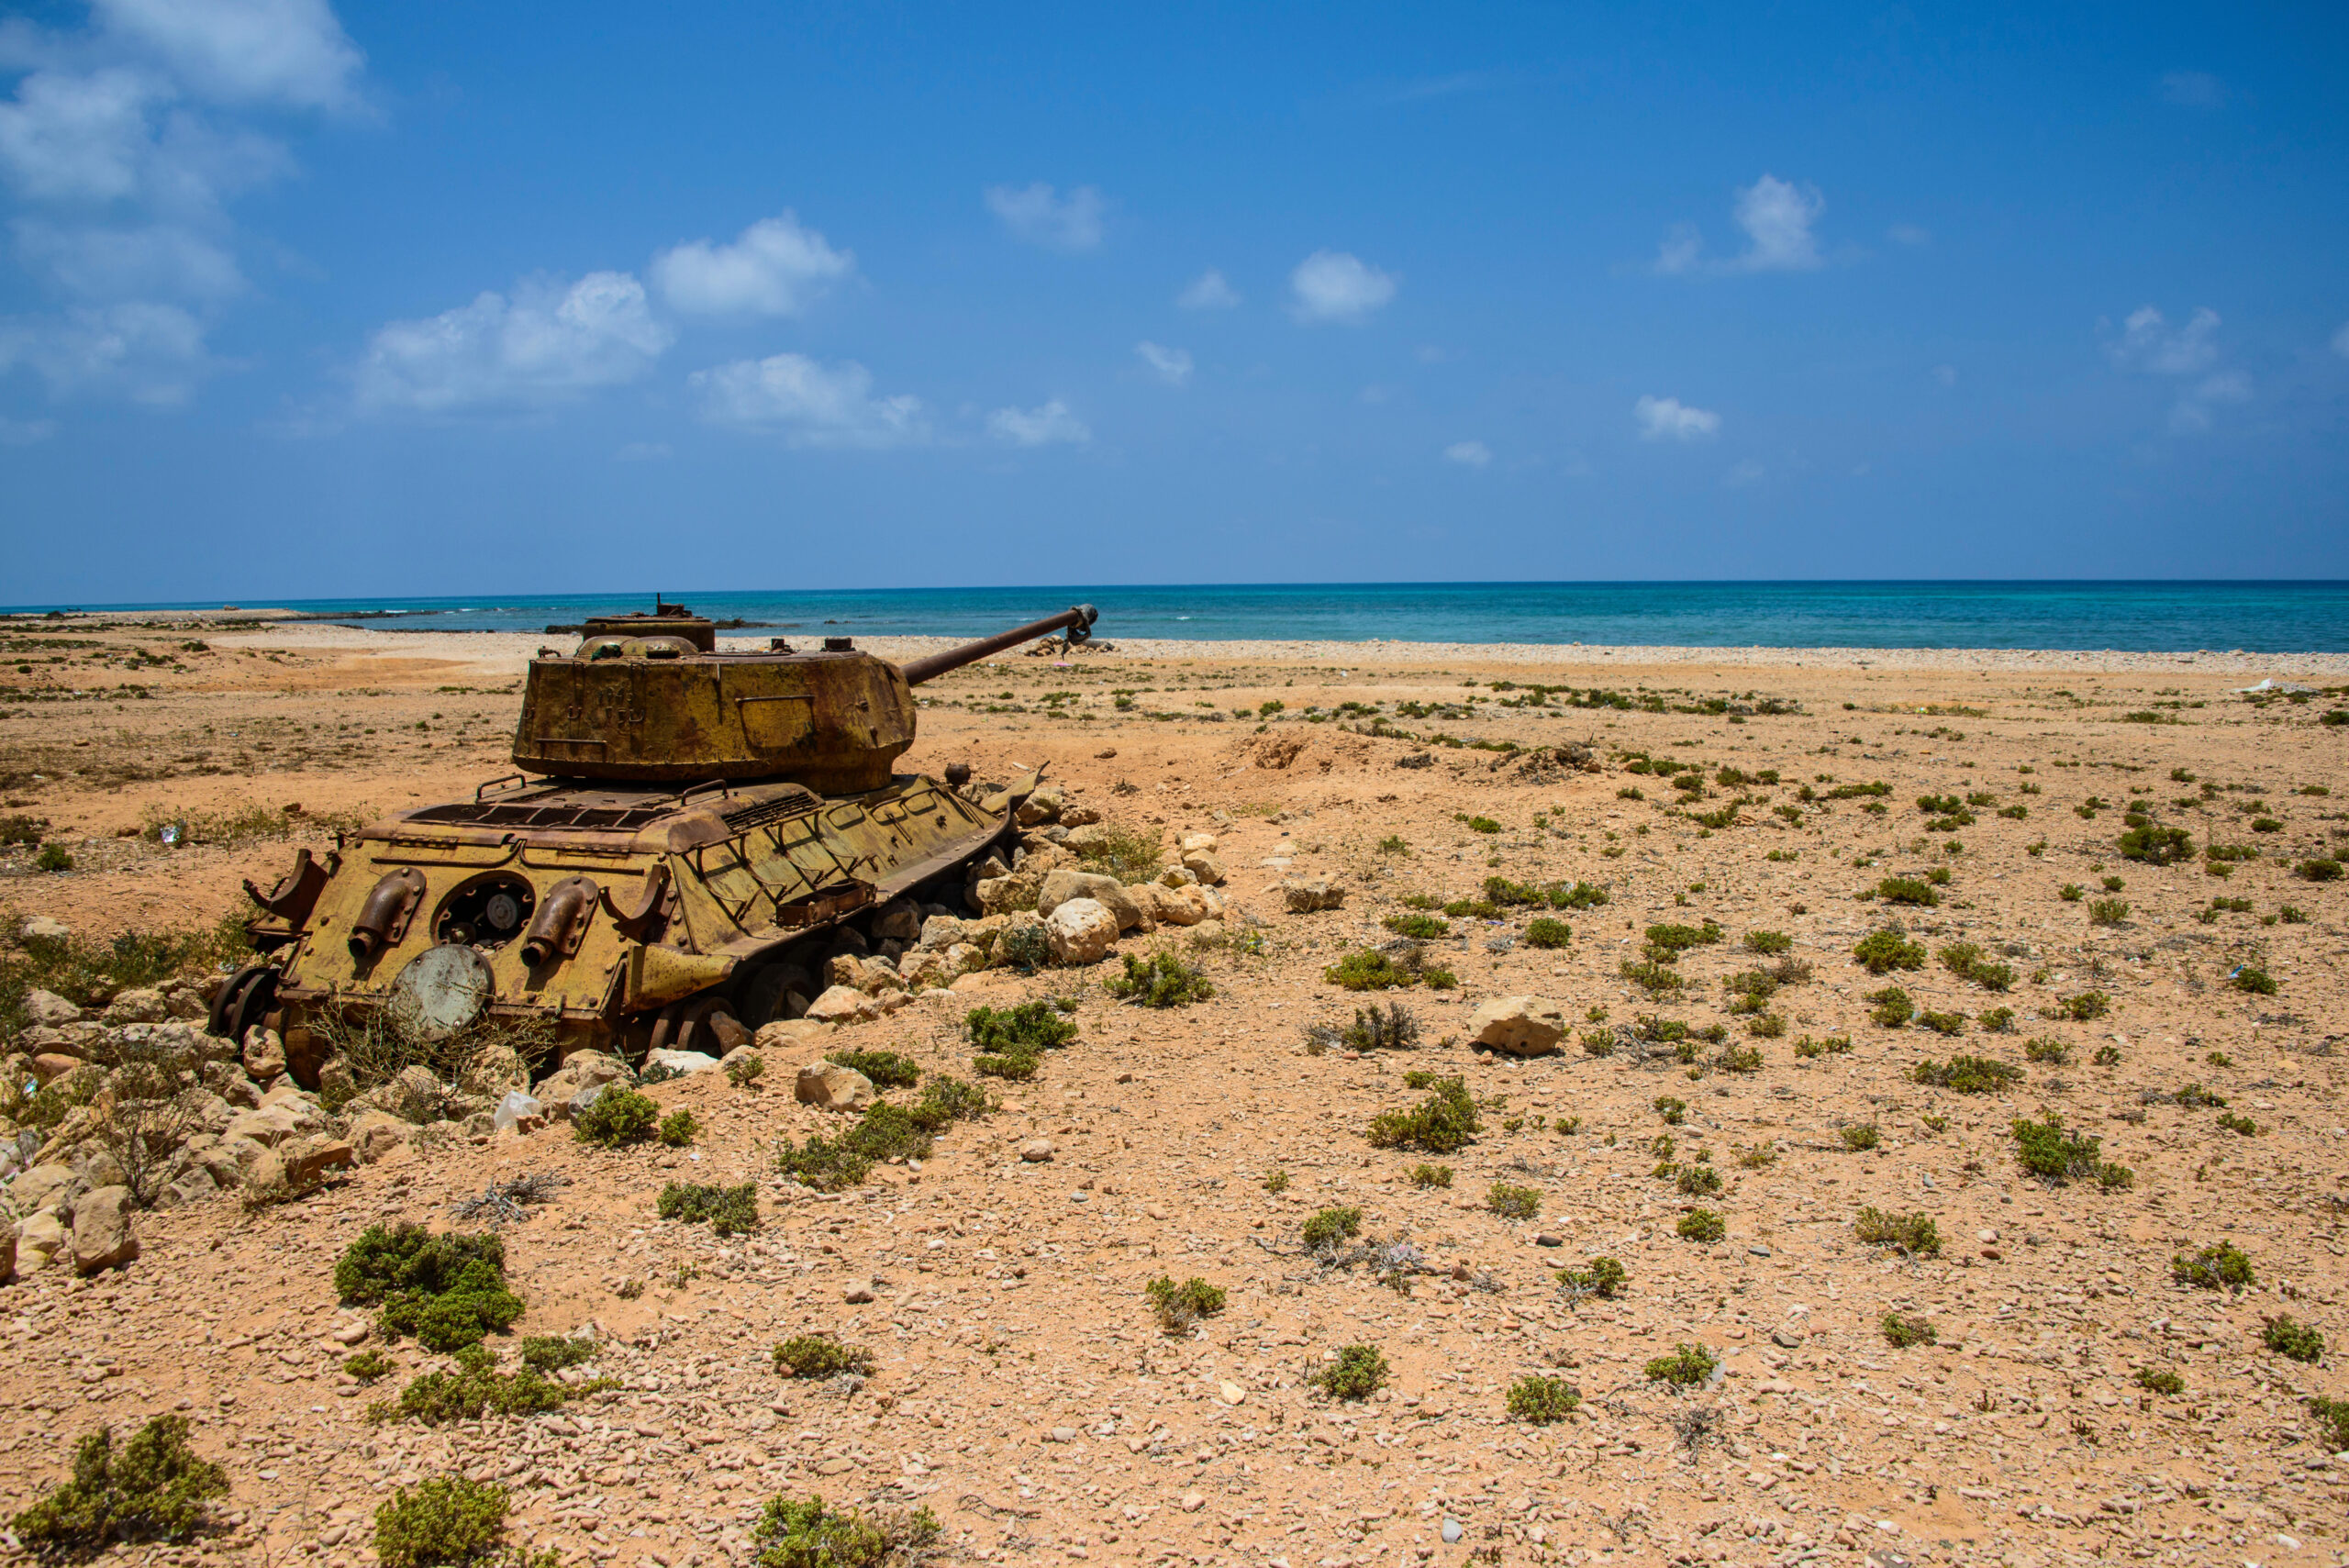 Could Emirati hold on Socotra resolve conflict in Yemen?